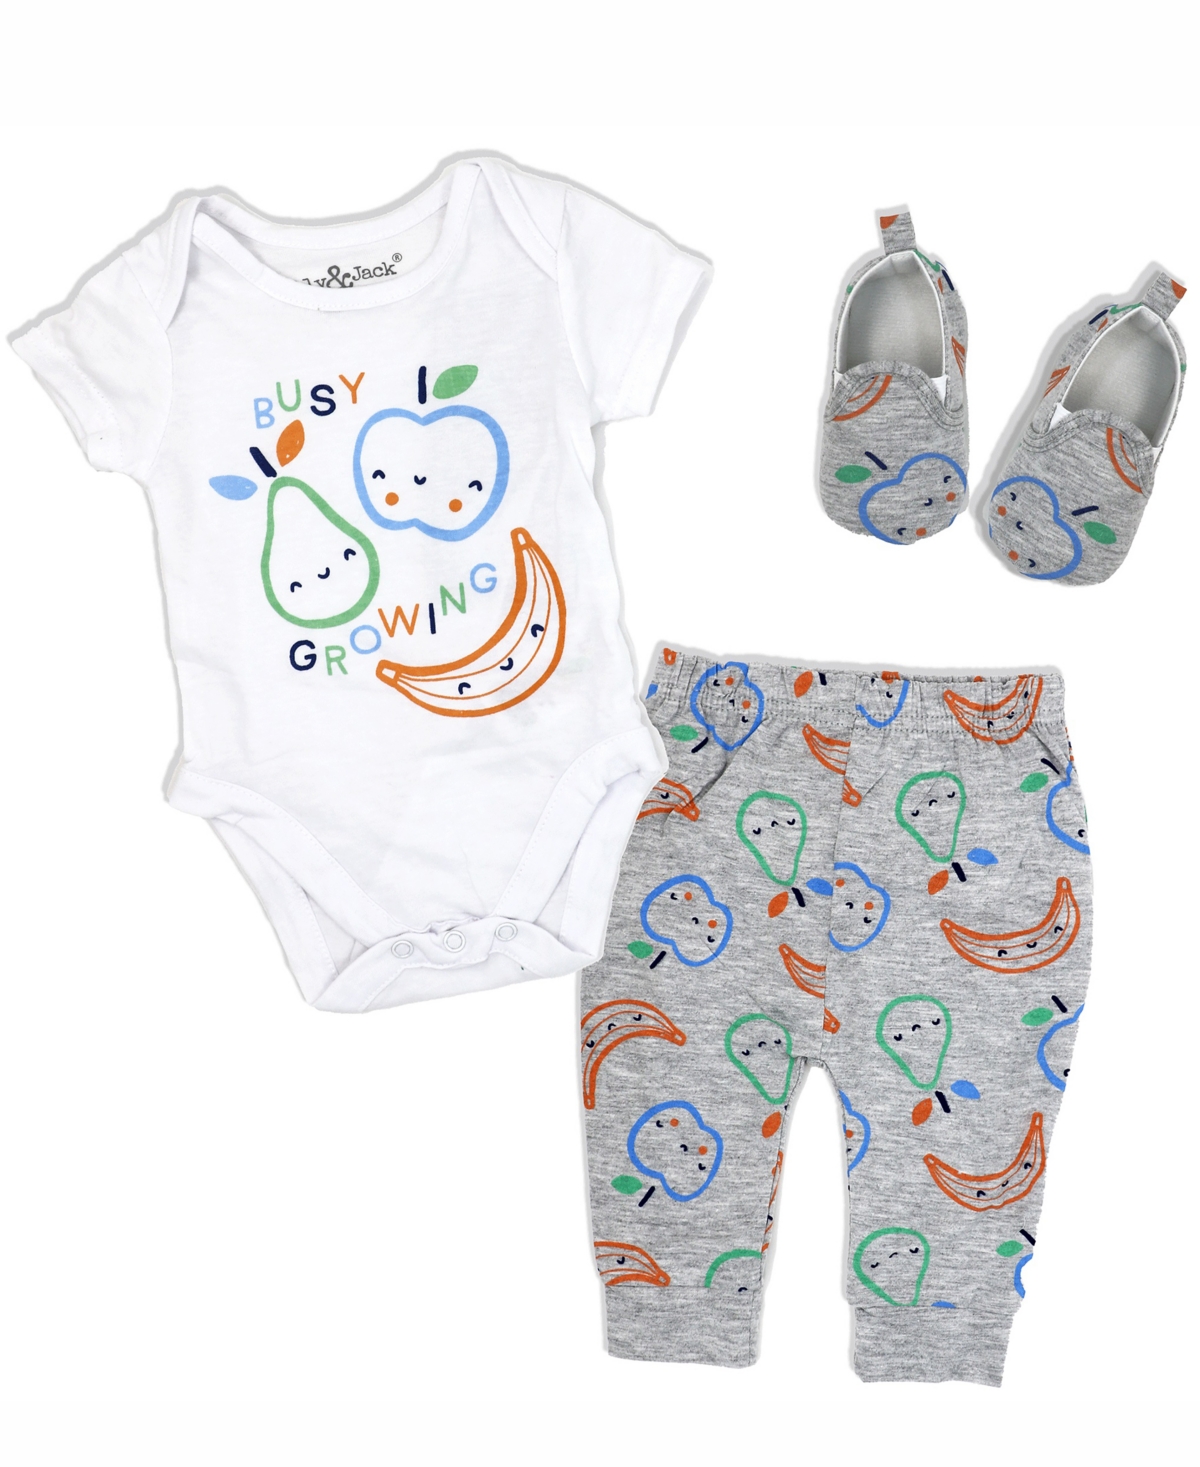 Lily & Jack Baby Boys Busy Growing Bodysuit, Jogger Pants And Shoes, 3 Piece Set In White